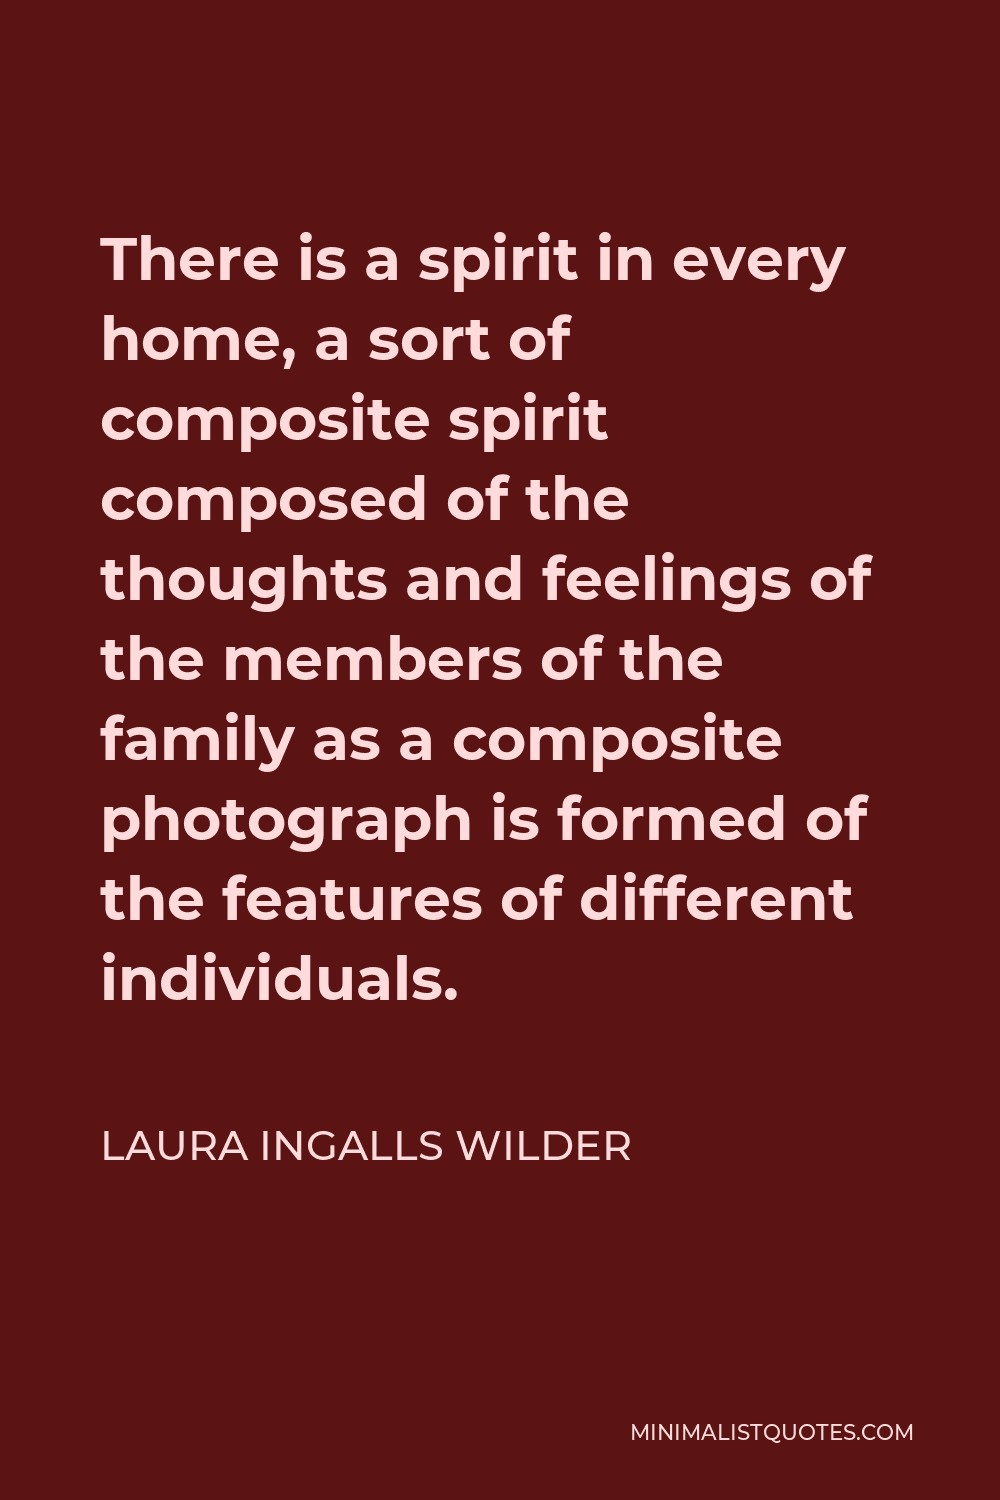 Laura Ingalls Wilder Quote - There is a spirit in every home, a sort of composite spirit composed of the thoughts and feelings of the members of the family as a composite photograph is formed of the features of different individuals.